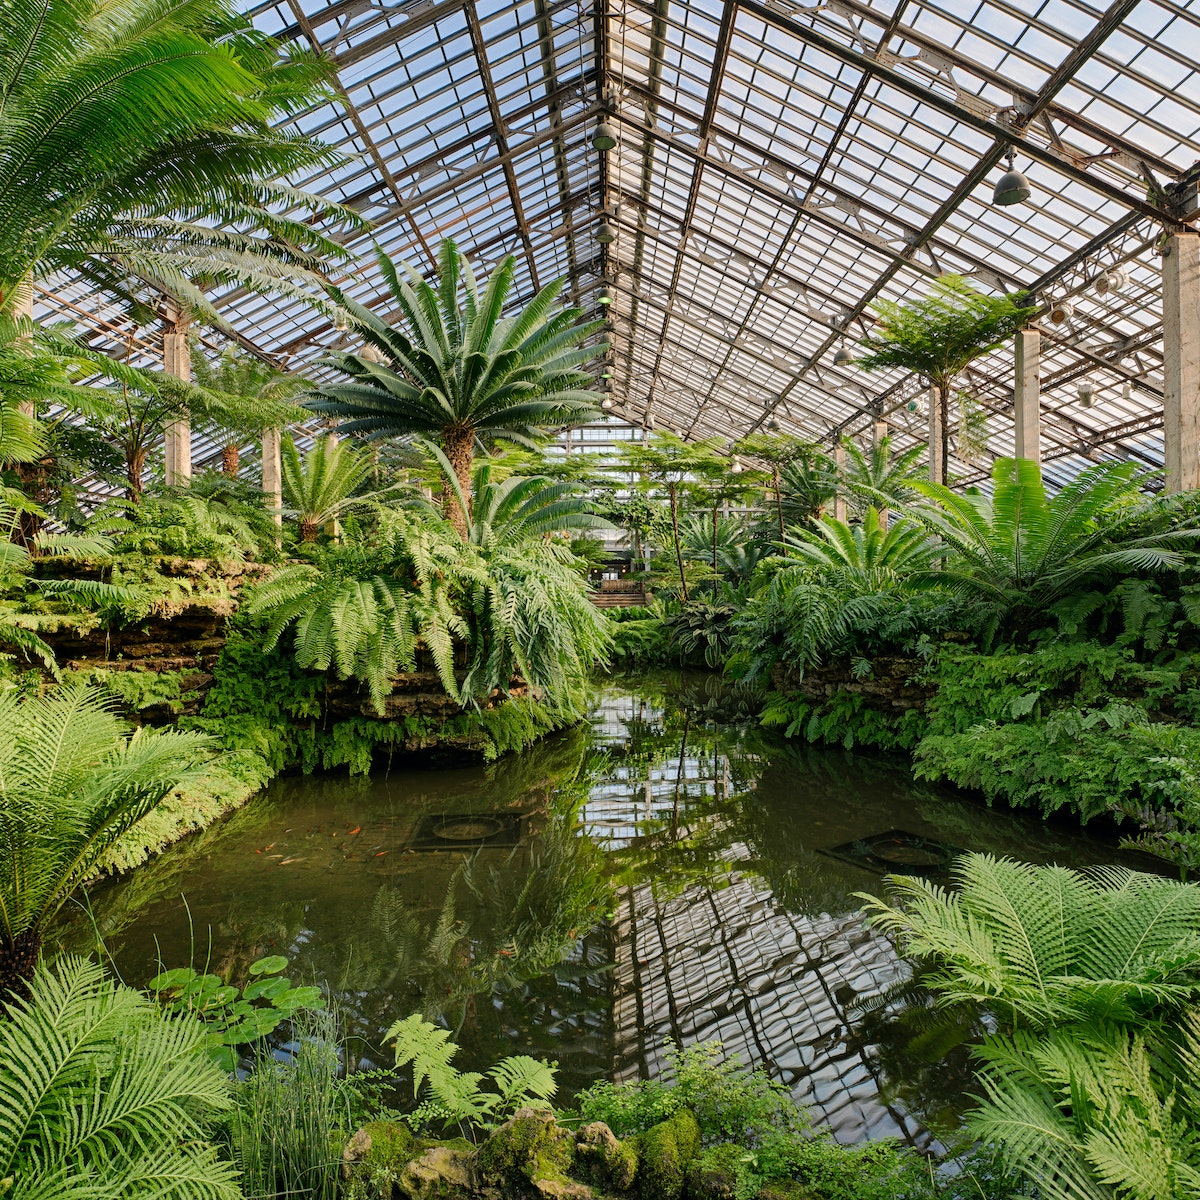 CHICAGO, ILLINOIS - DECEMBER 9: Fern Room of the Garfield Park Conservatory on December 9, 2013 in Chicago, Illinois; Shutterstock ID 166759727; Your name (First / Last): Josh Vogel; Project no. or GL code: 56530; Network activity no. or Cost Centre: Online-Design; Product or Project: 65050/7529/Josh Vogel/LP.com Destination Galleries